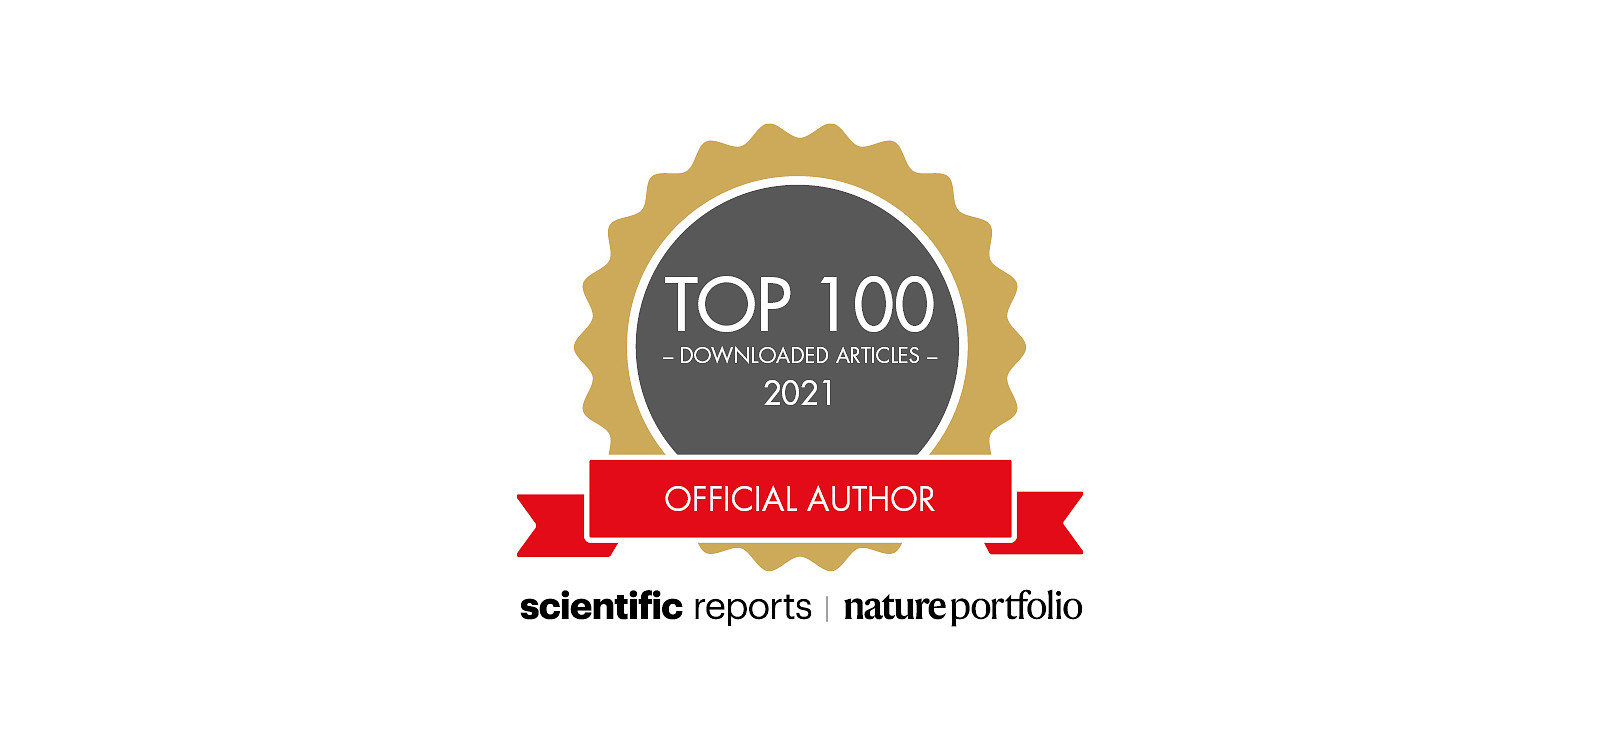 COVID-19 diagnosis by routine blood tests using machine learning is in the Top 100 Scientific Reportspapers in 2021